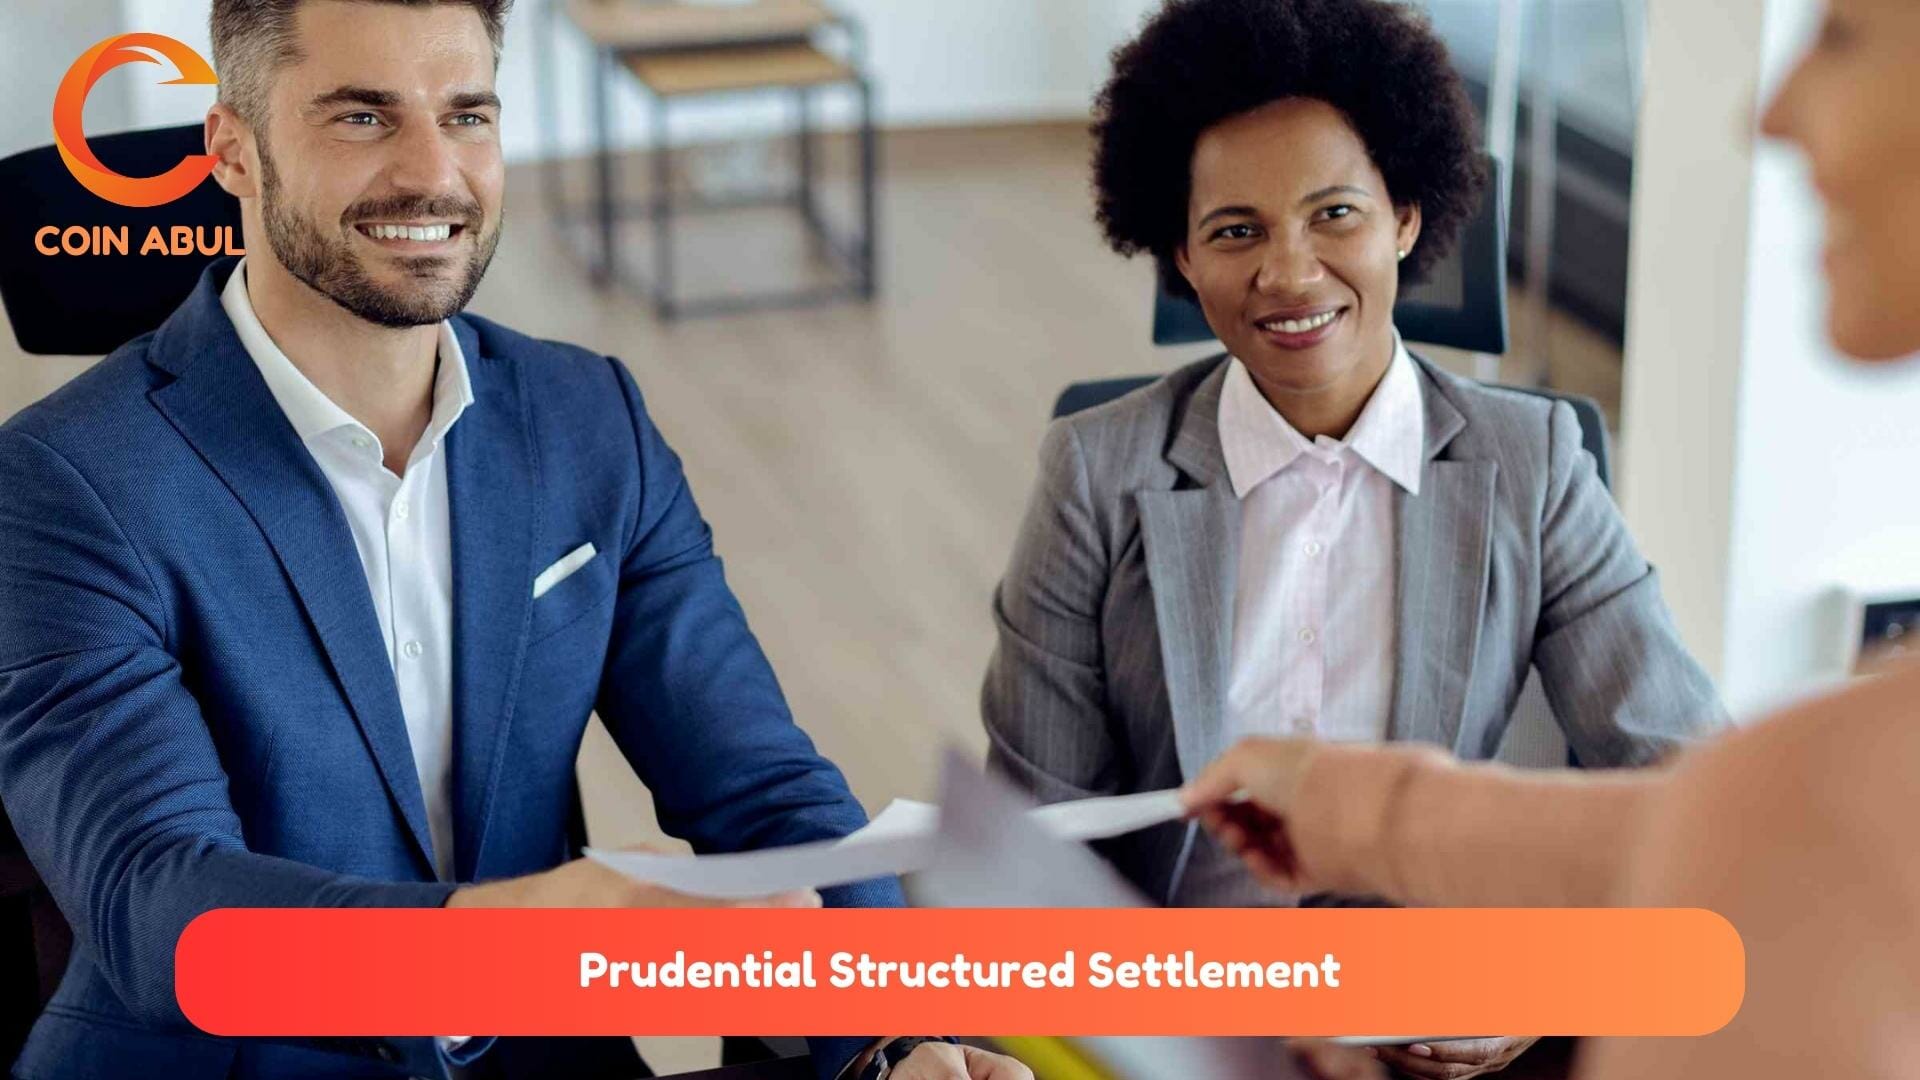 Prudential Structured Settlement